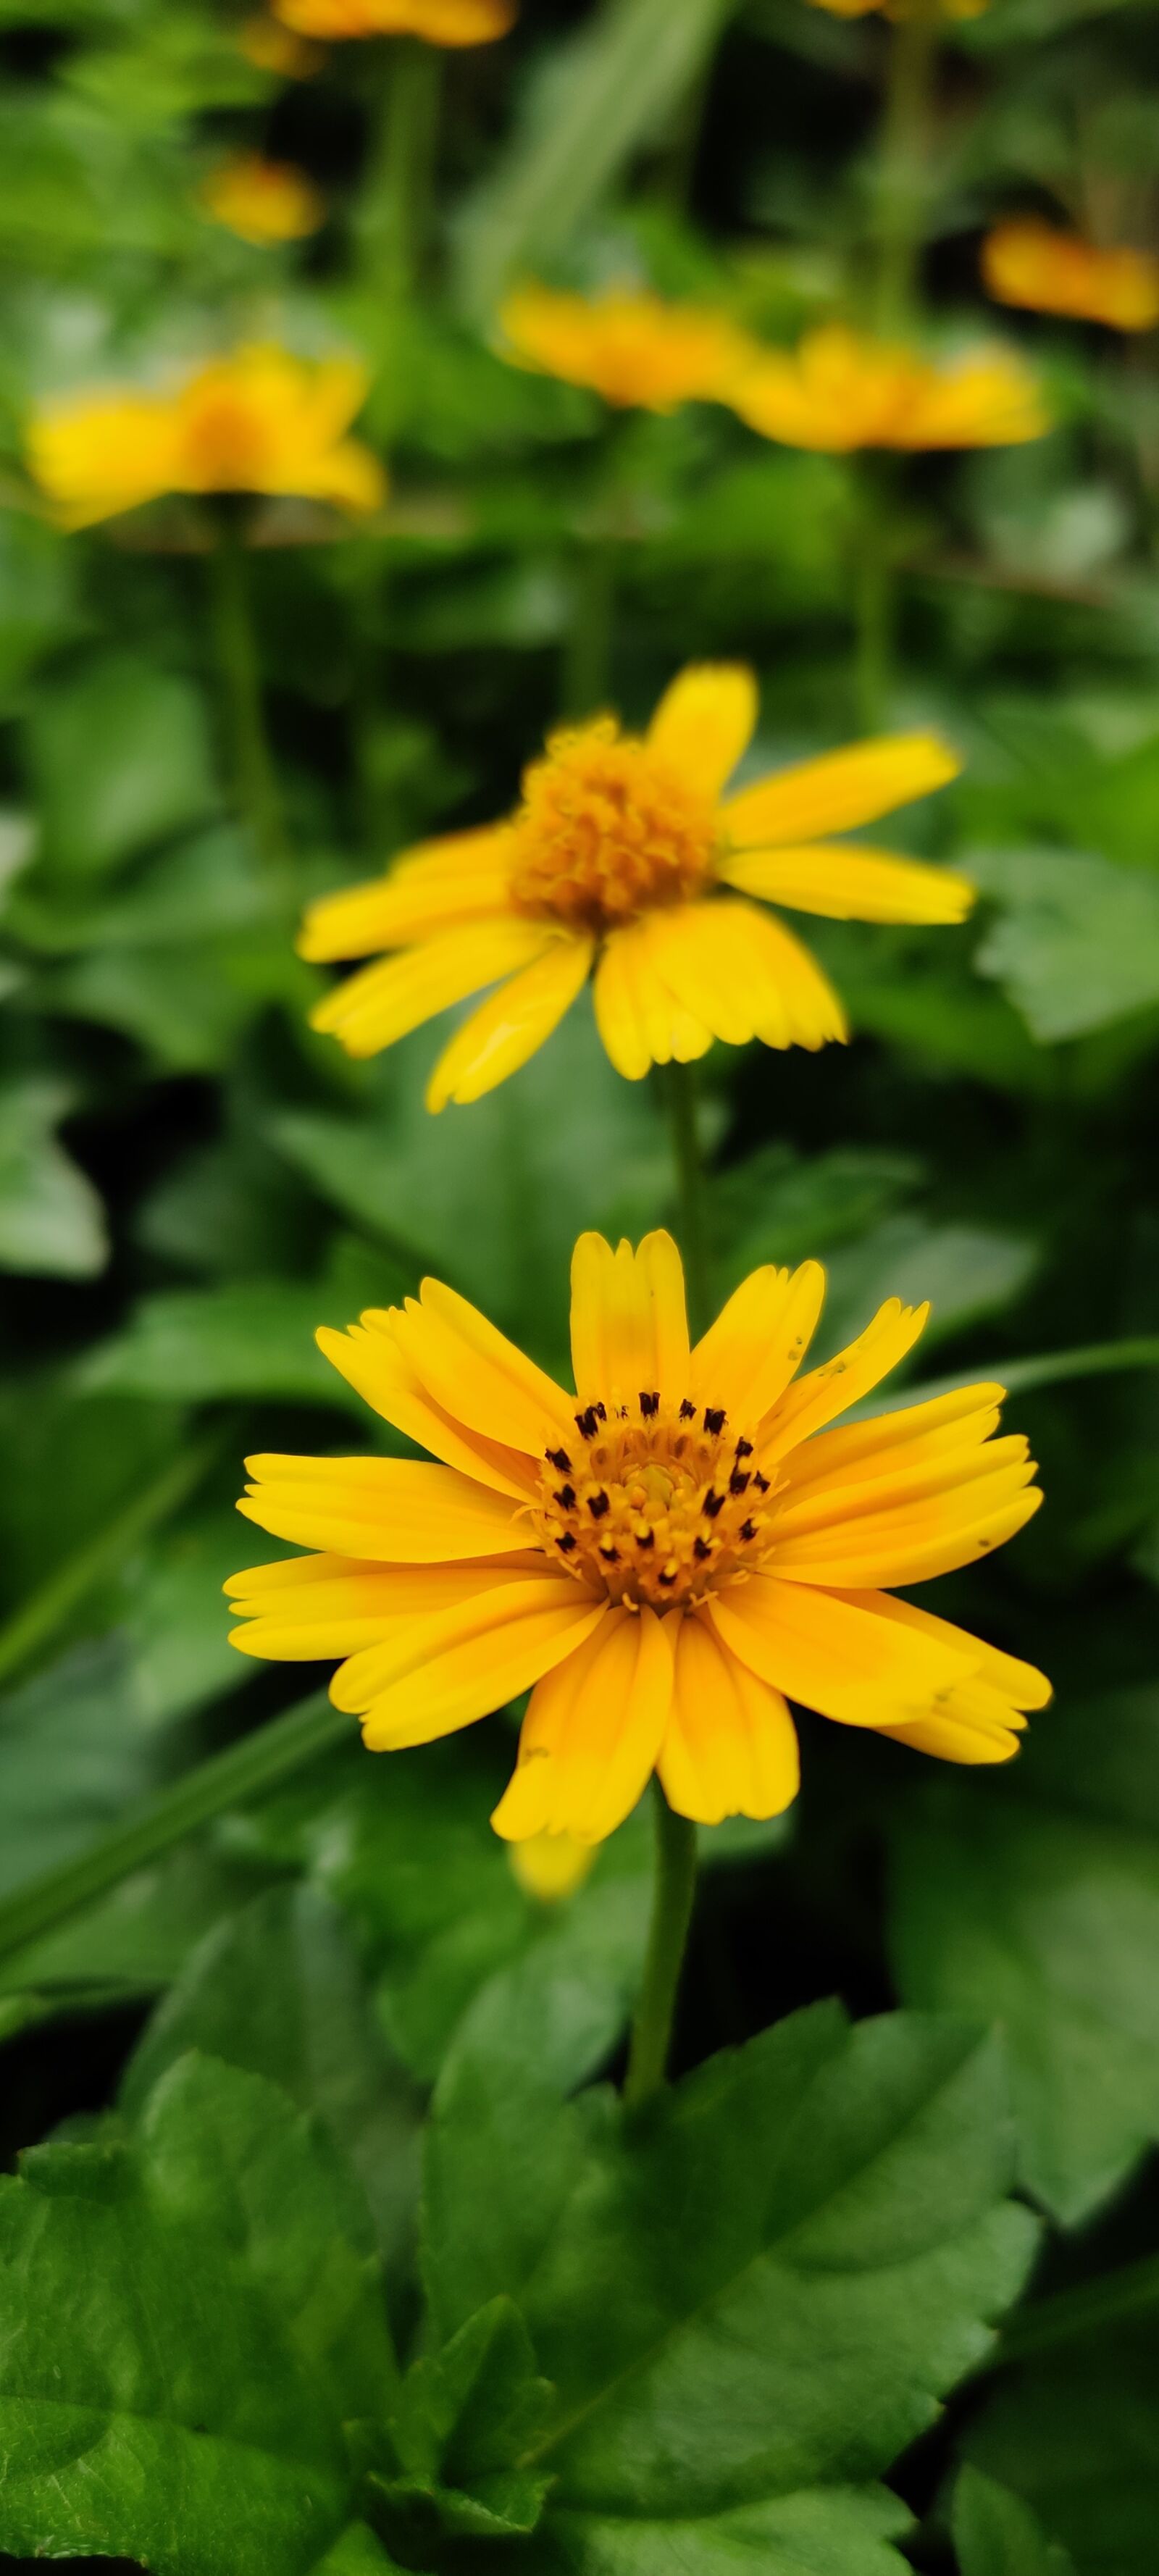 OnePlus HD1901 sample photo. Flower, yellow, day photography